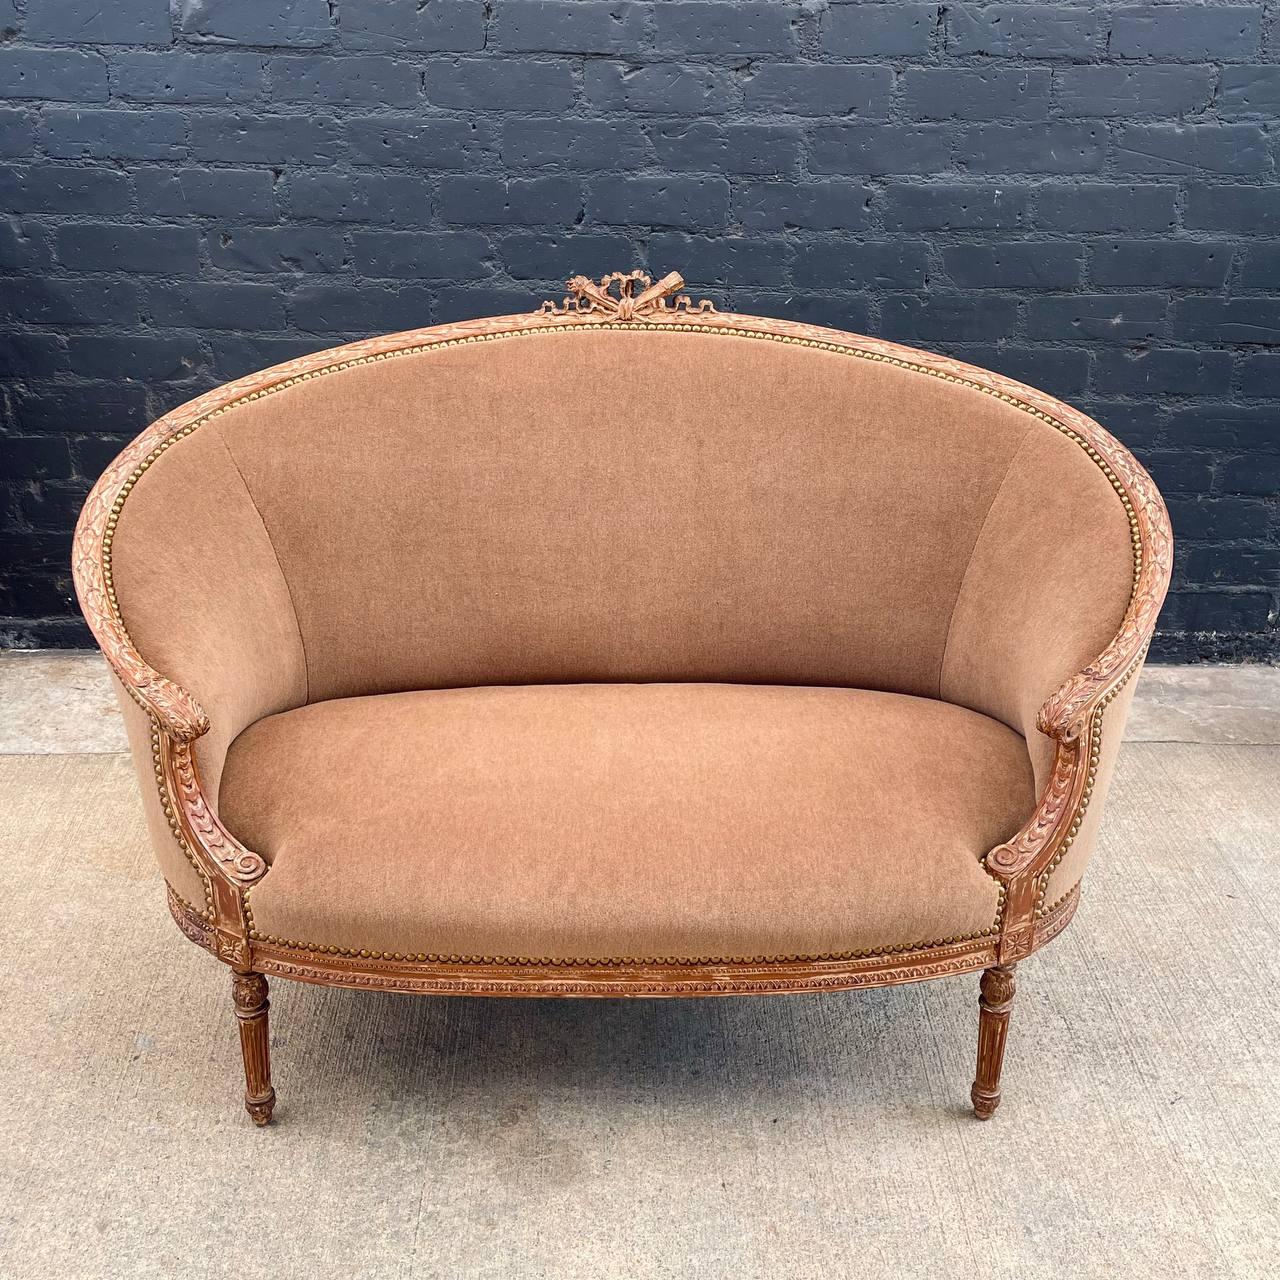 Early 20th Century Antique French Louis XVI Alpaca Mohair Love Seat Sofa with Carved Details For Sale